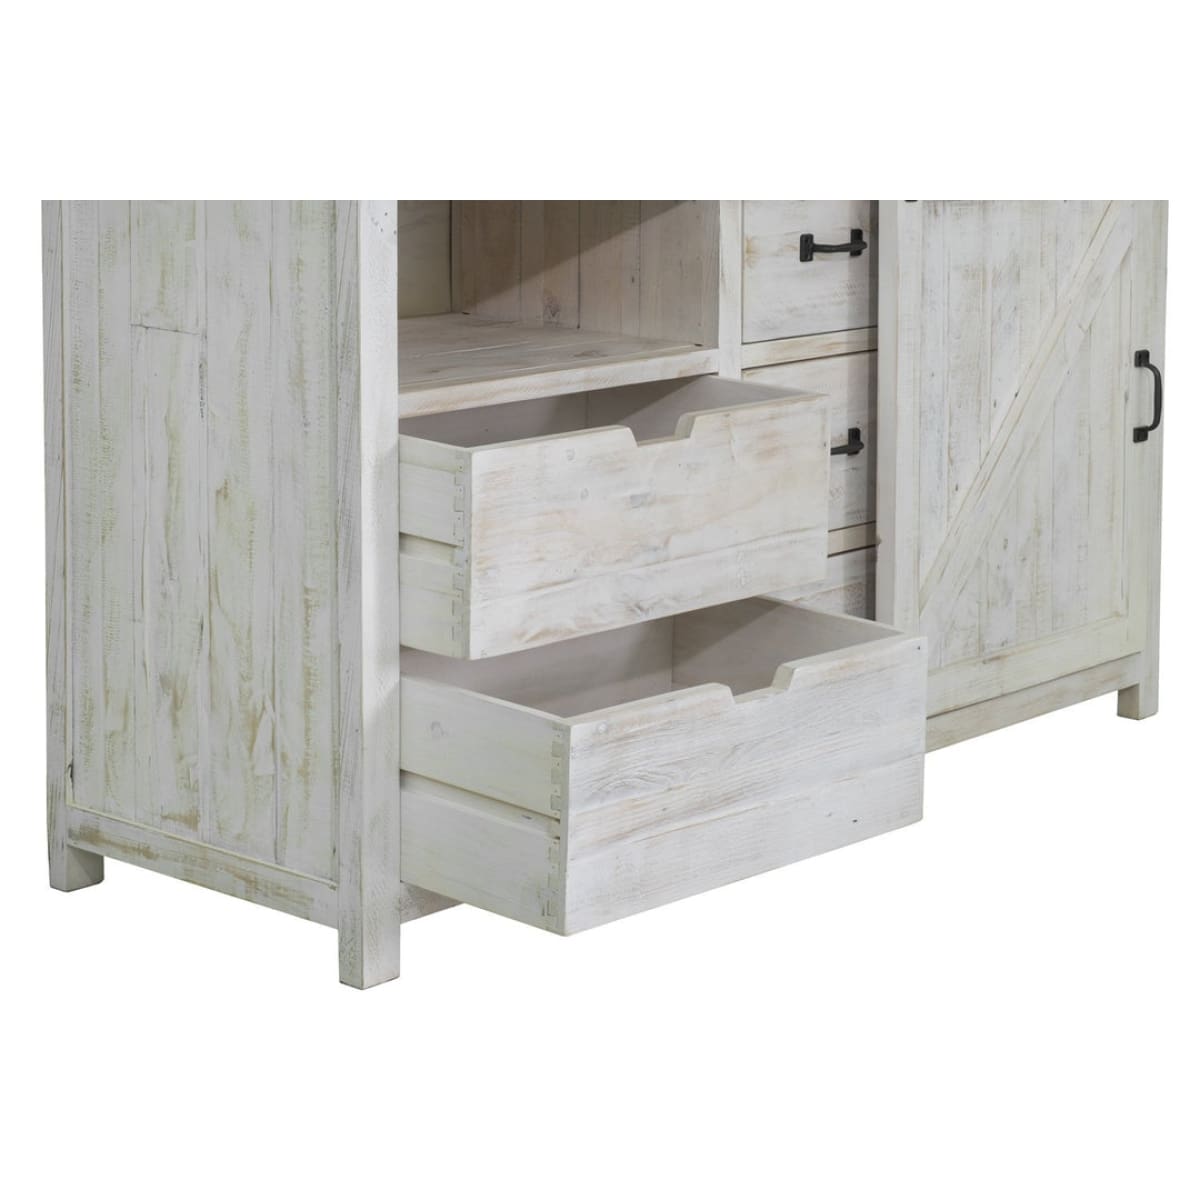 Provence 3 Drawer Dresser With 1 Door - lh-import-dressers